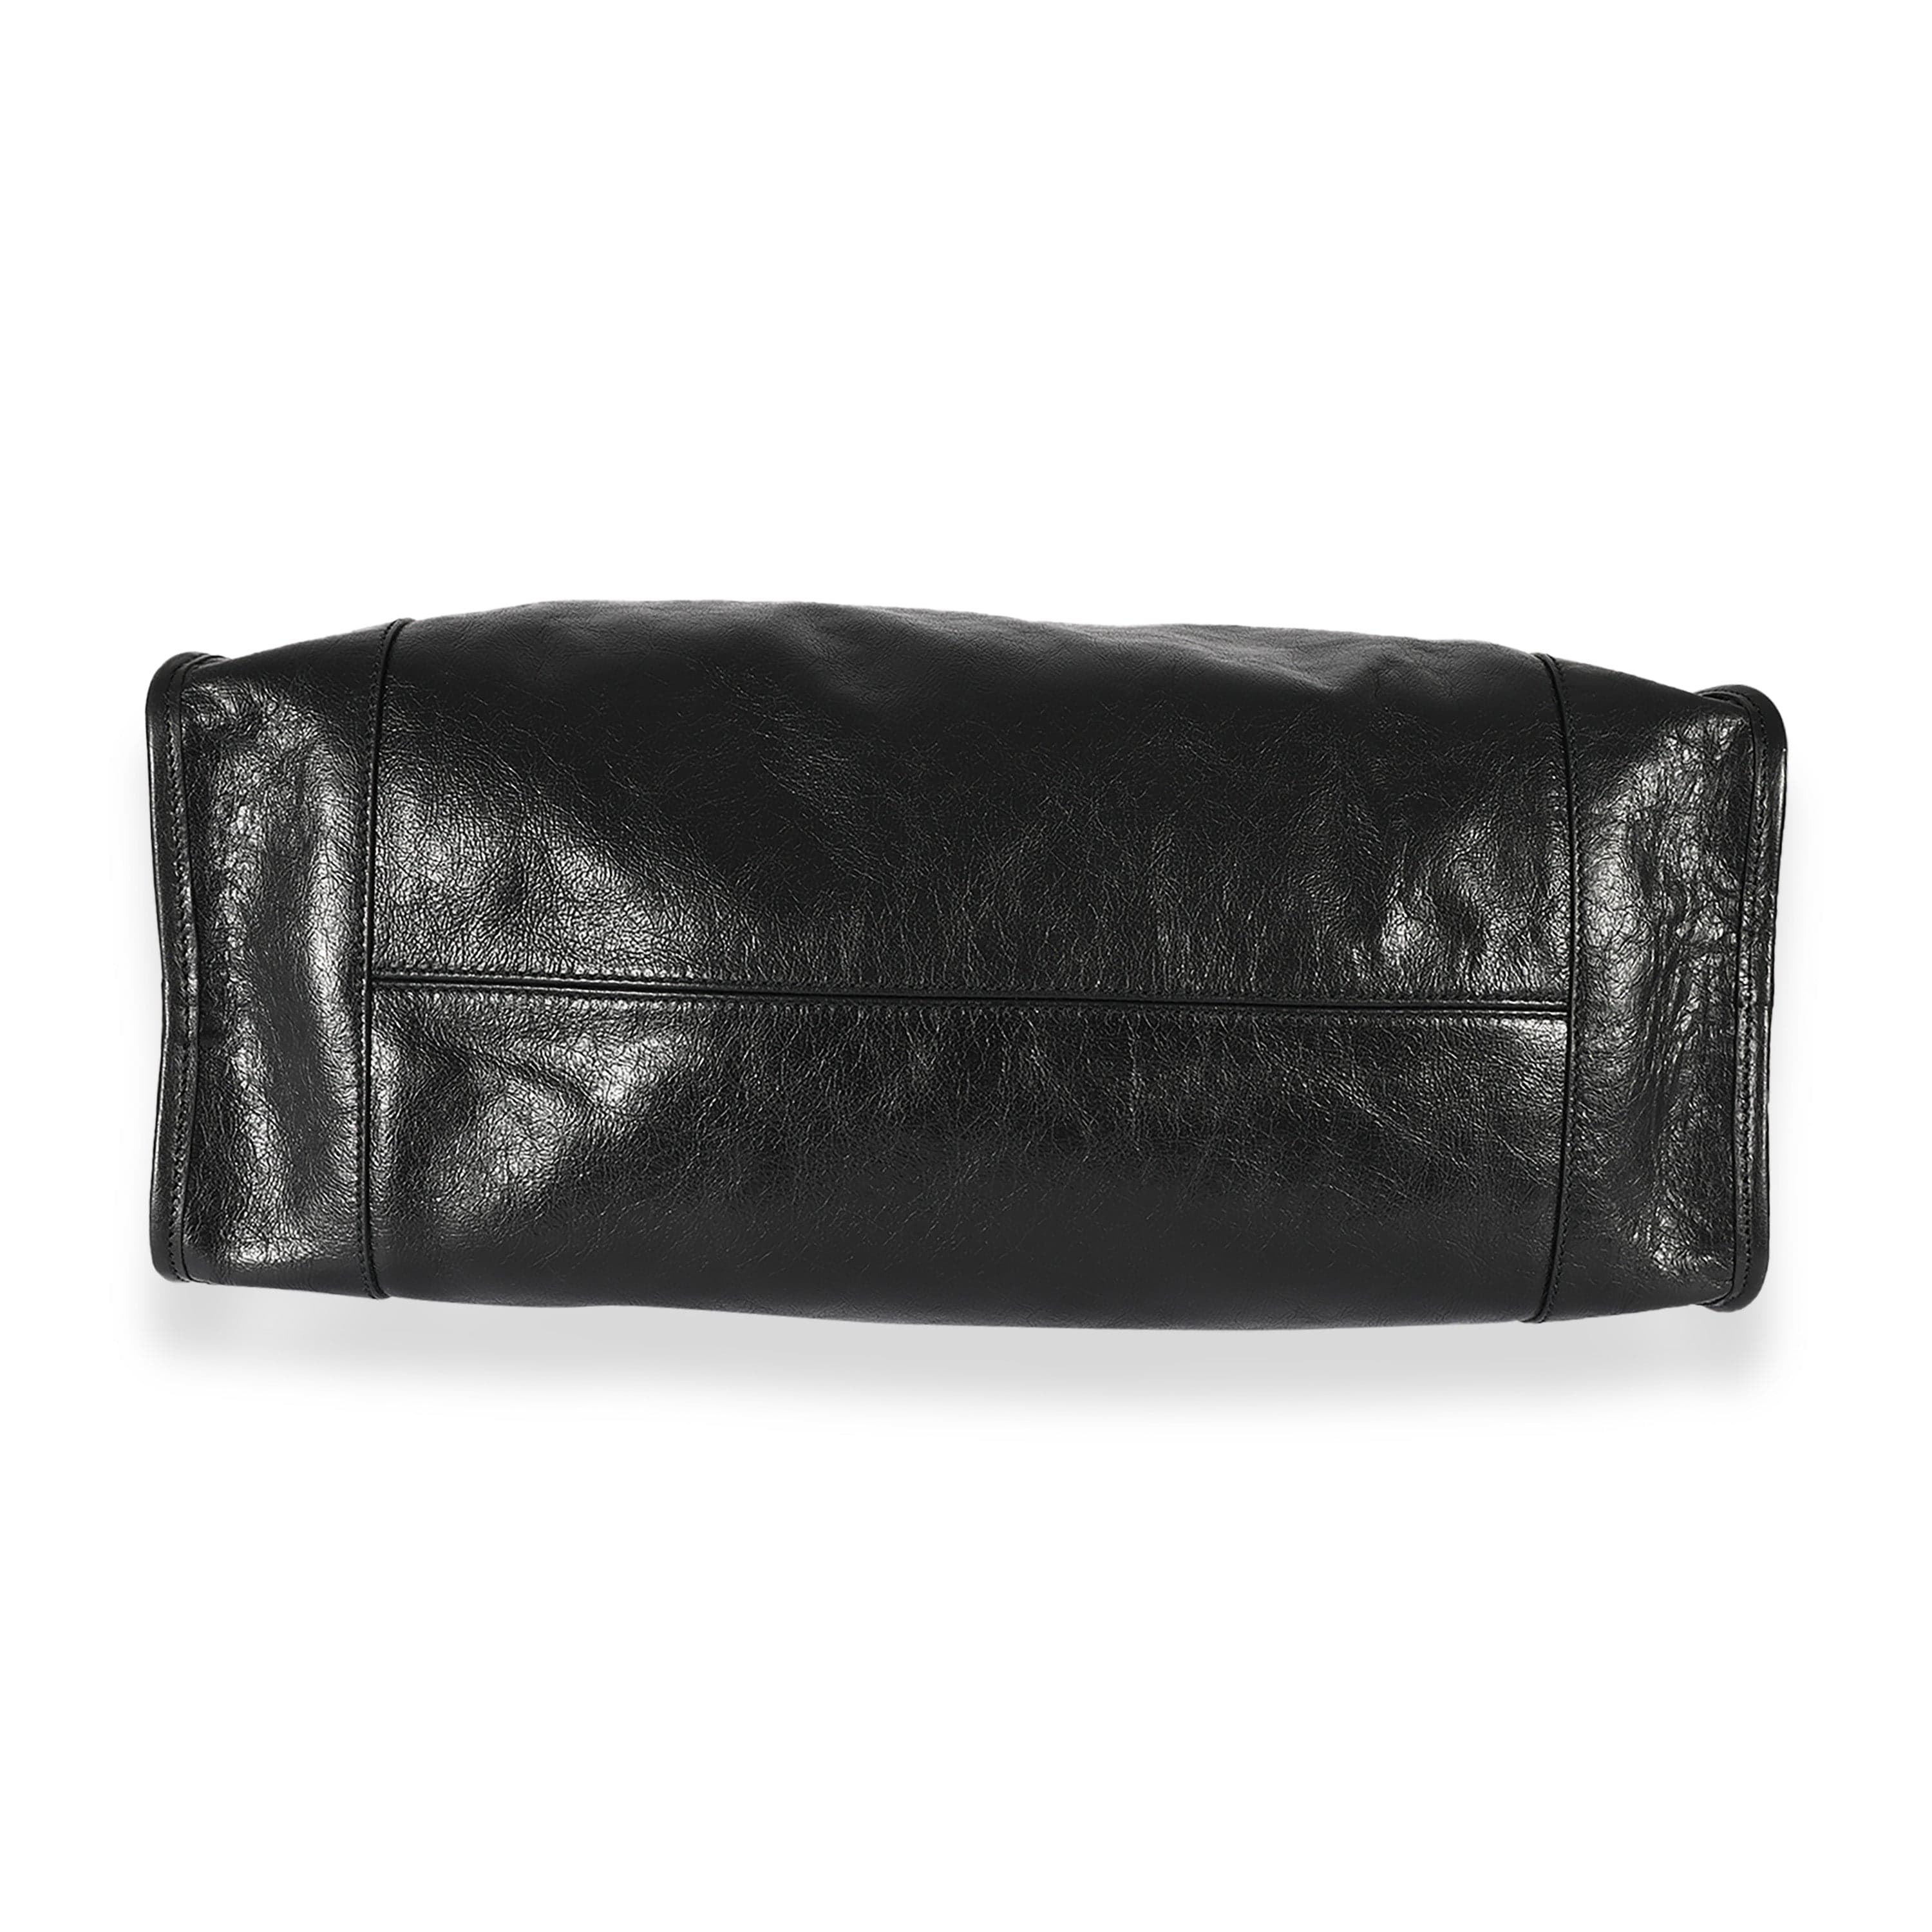 Gucci Gucci Black Leather Morpheus Weekender